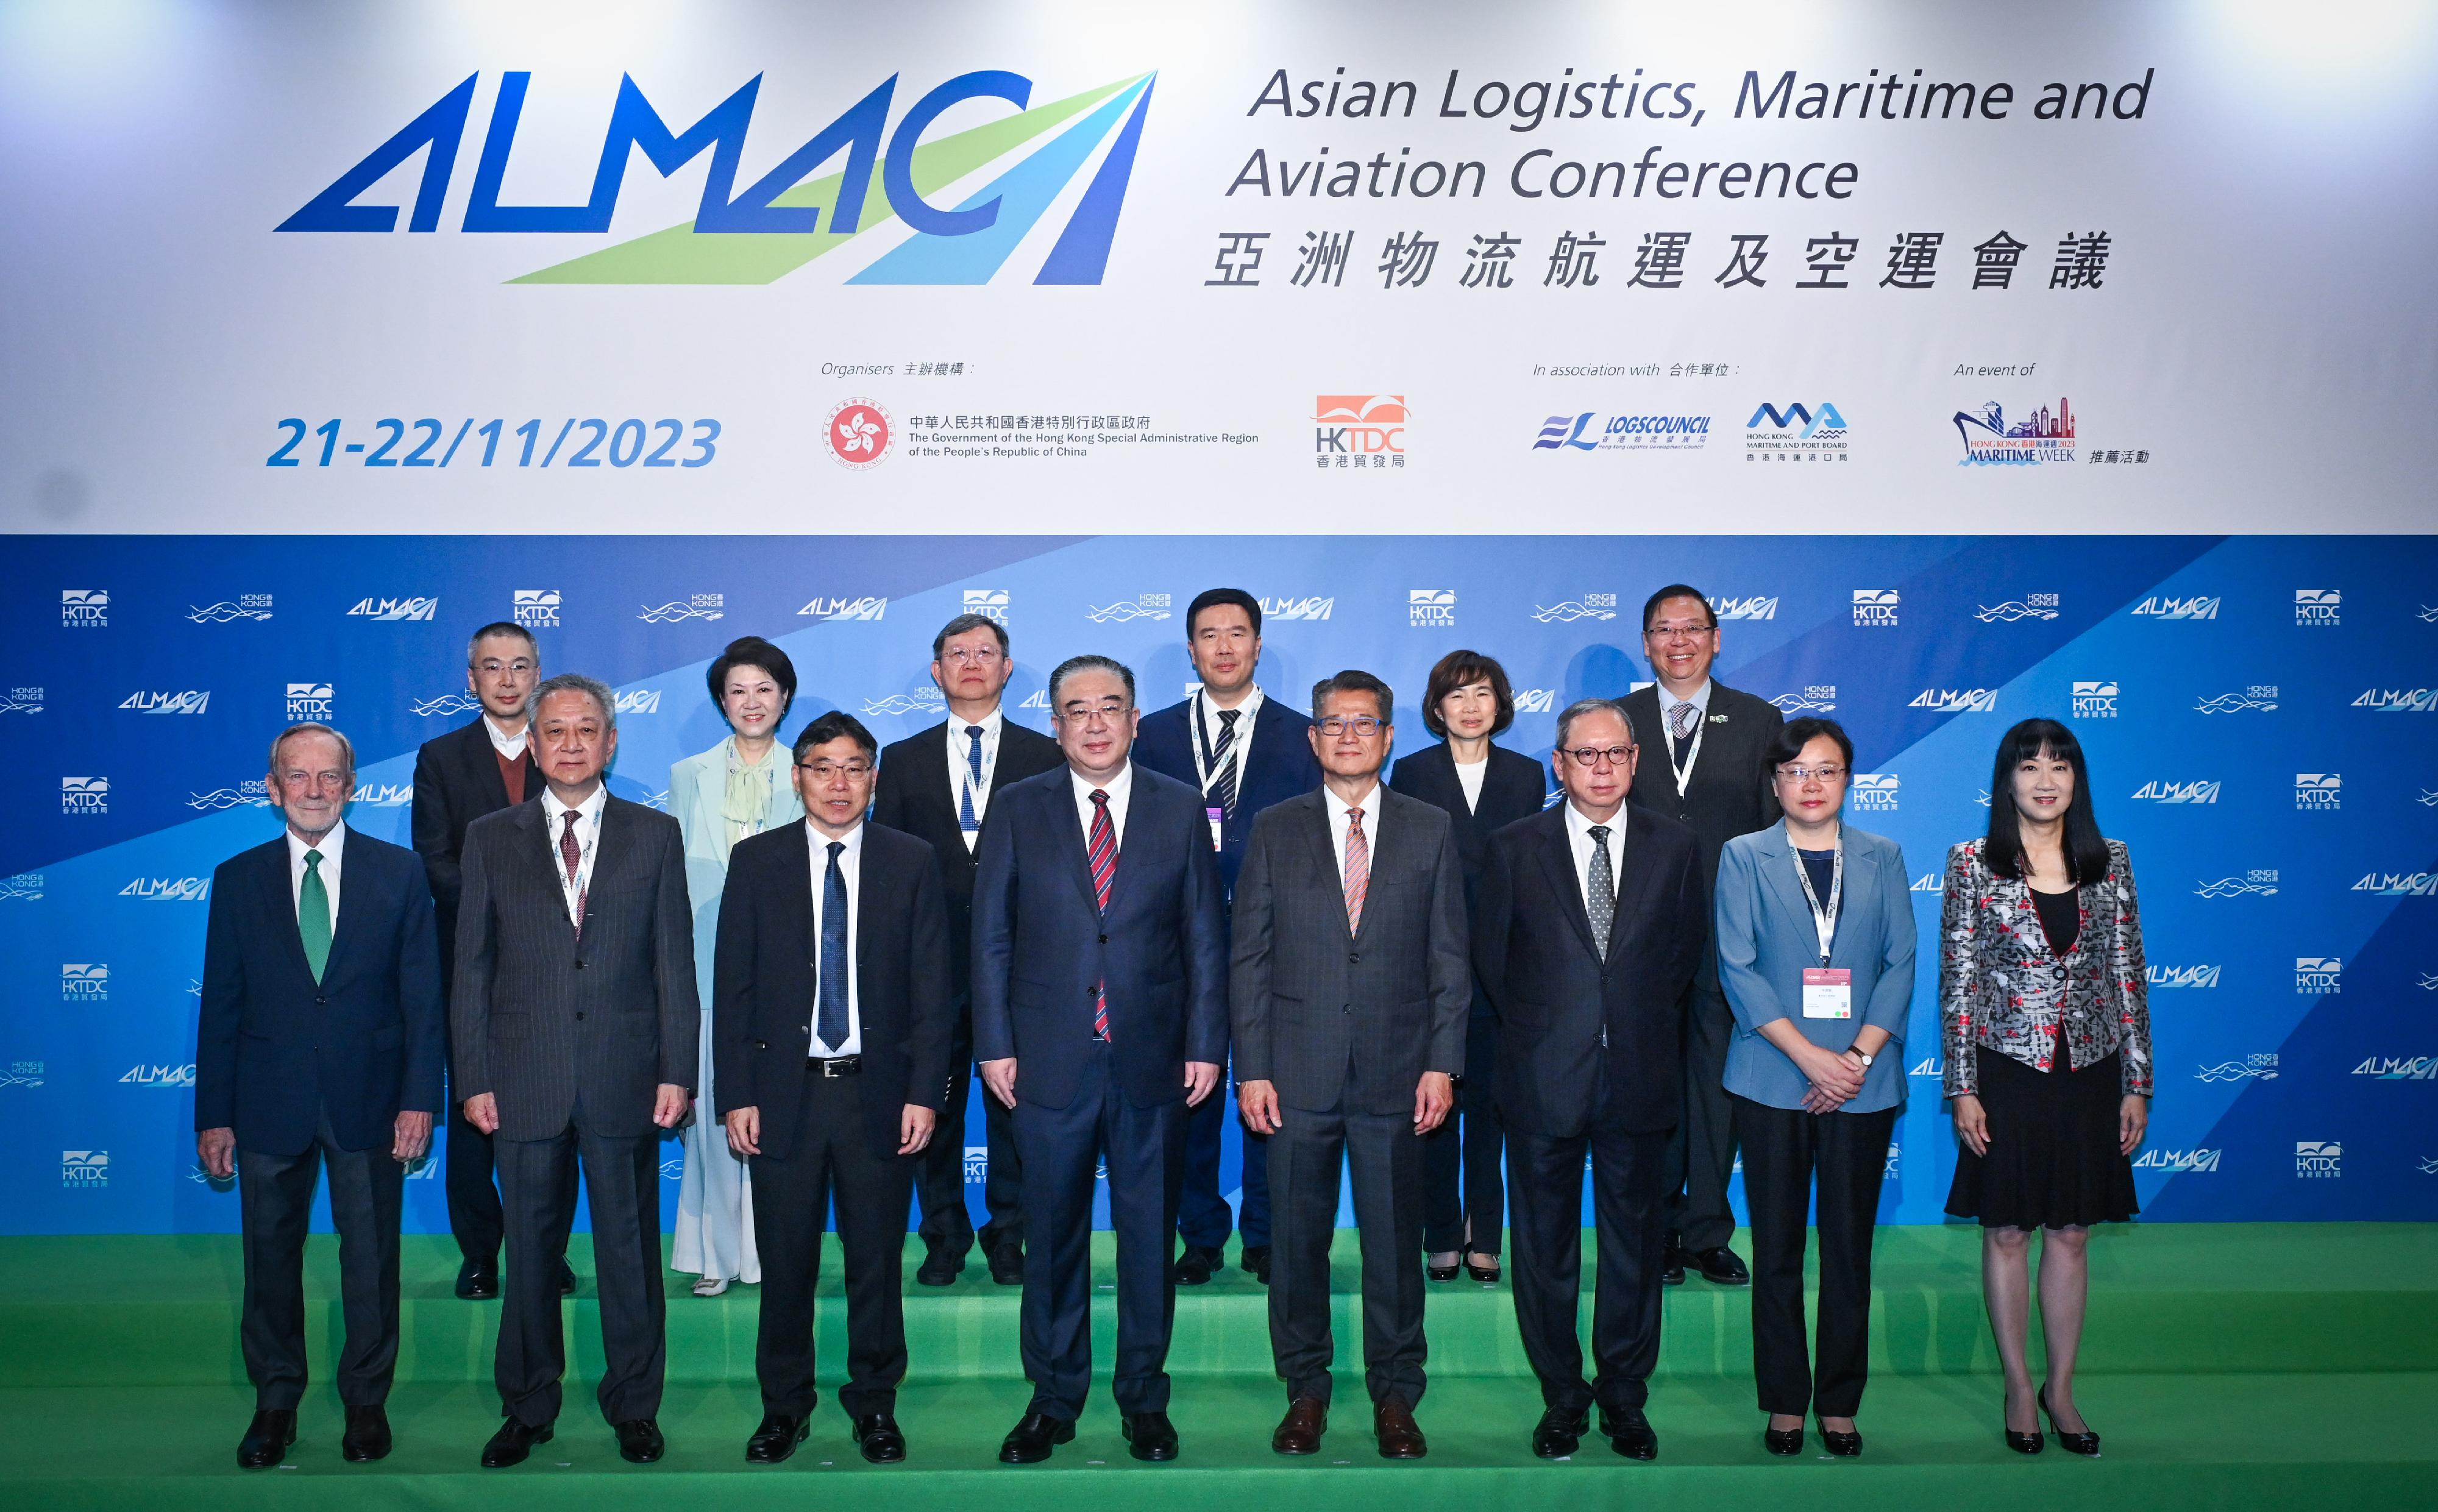 The Financial Secretary, Mr Paul Chan, attended the Asian Logistics, Maritime and Aviation Conference 2023 today (November 21). Photo shows (front row, from third left) the Secretary for Transport and Logistics, Mr Lam Sai-hung; Vice Minister of Transport Mr Fu Xuyin; Mr Chan; the Chairman of the Hong Kong Trade Development Council (HKTDC), Dr Peter Lam; Vice Mayor of Chongqing Municipal People's Government Ms Zhang Guozhi; the Executive Director of the HKTDC, Ms Margaret Fong, and other guests at the conference.